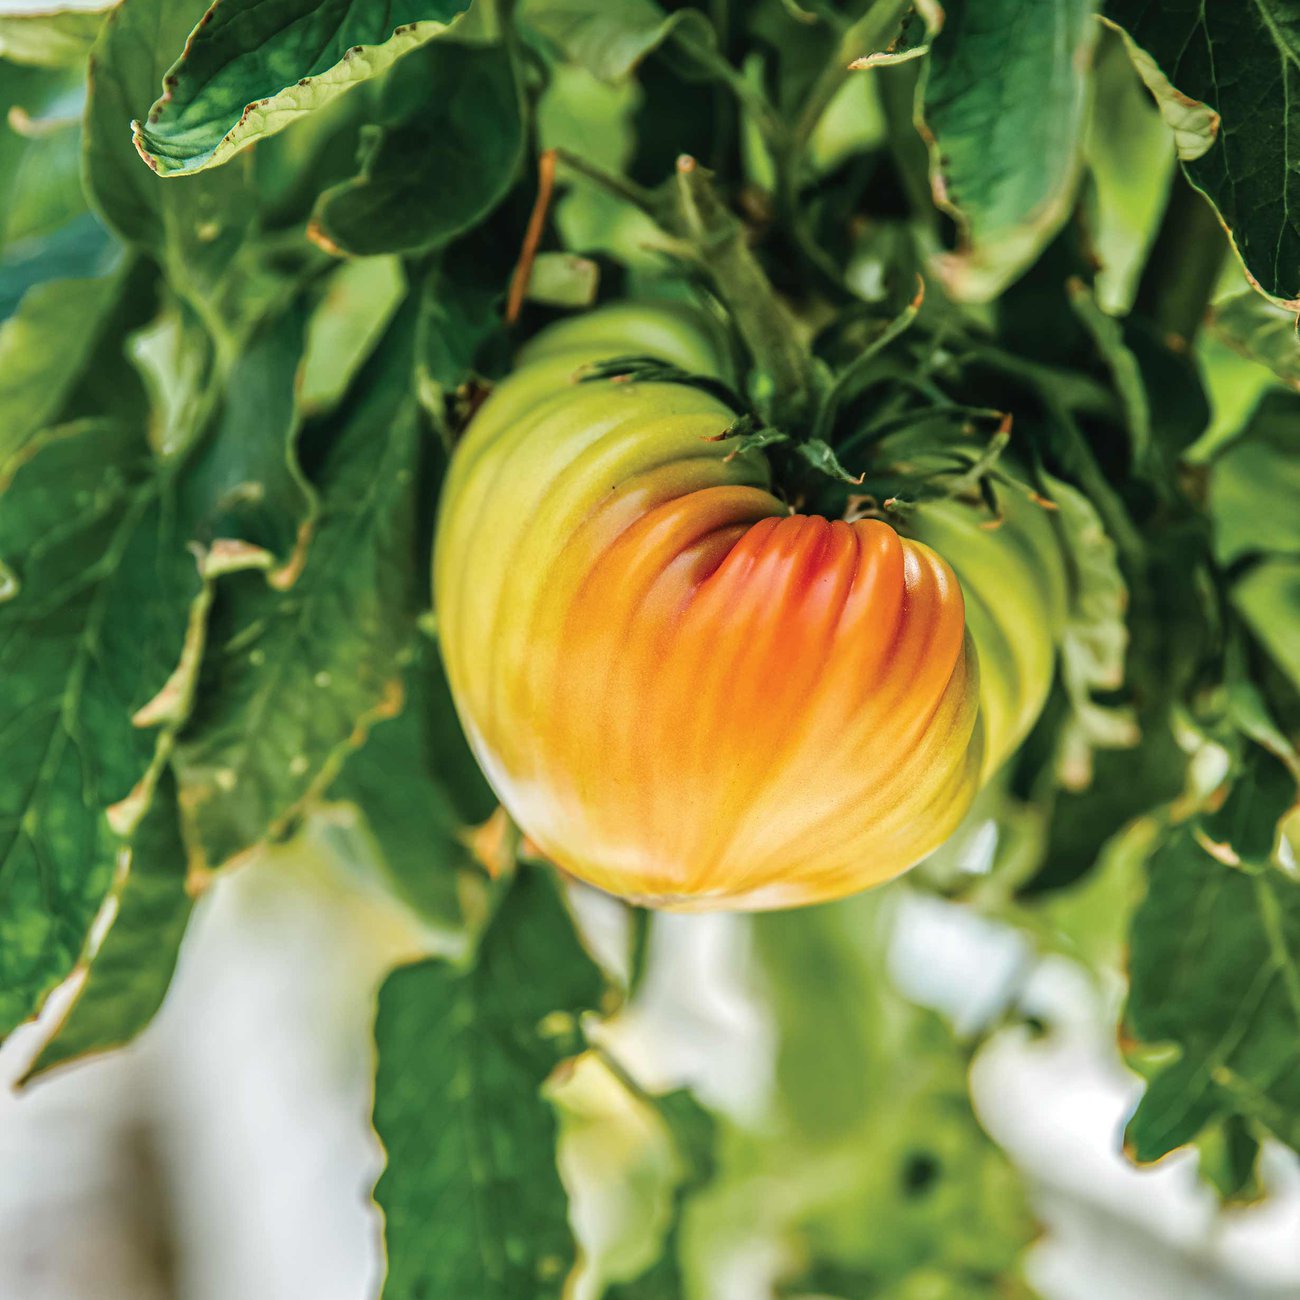 Heirloom tomatoes come in all shapes and sizes.